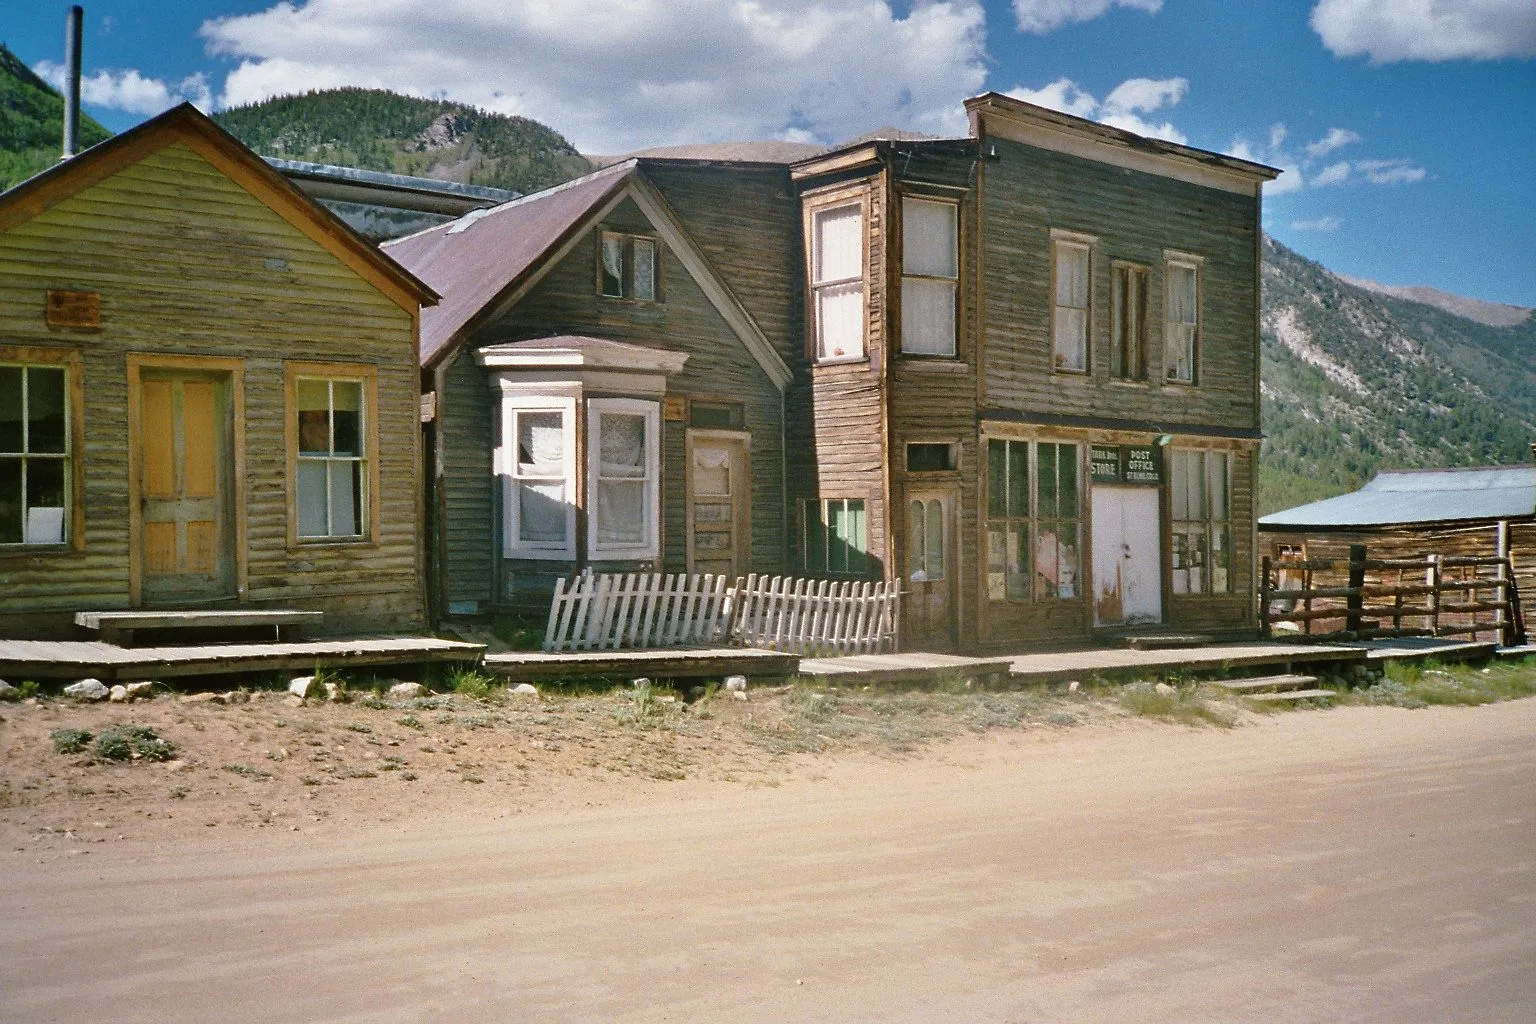 Photo showing: Scene in the ghost town of St. Elmo in Chaffee County, Colorado, United States.  The entire community is listed as a historic district on the National Register of Historic Places.